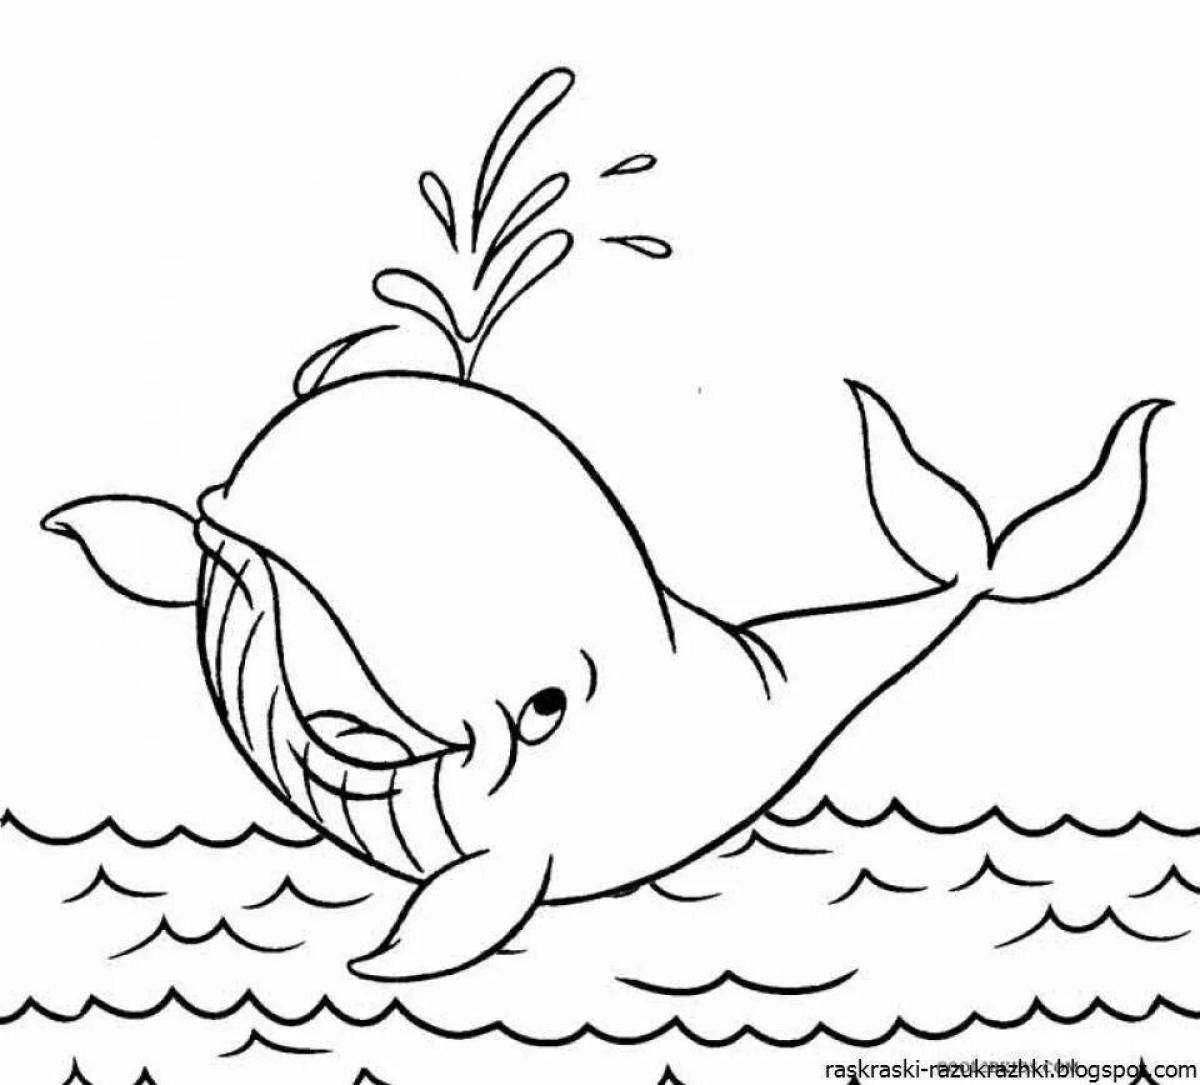 Colored whale coloring page for kids